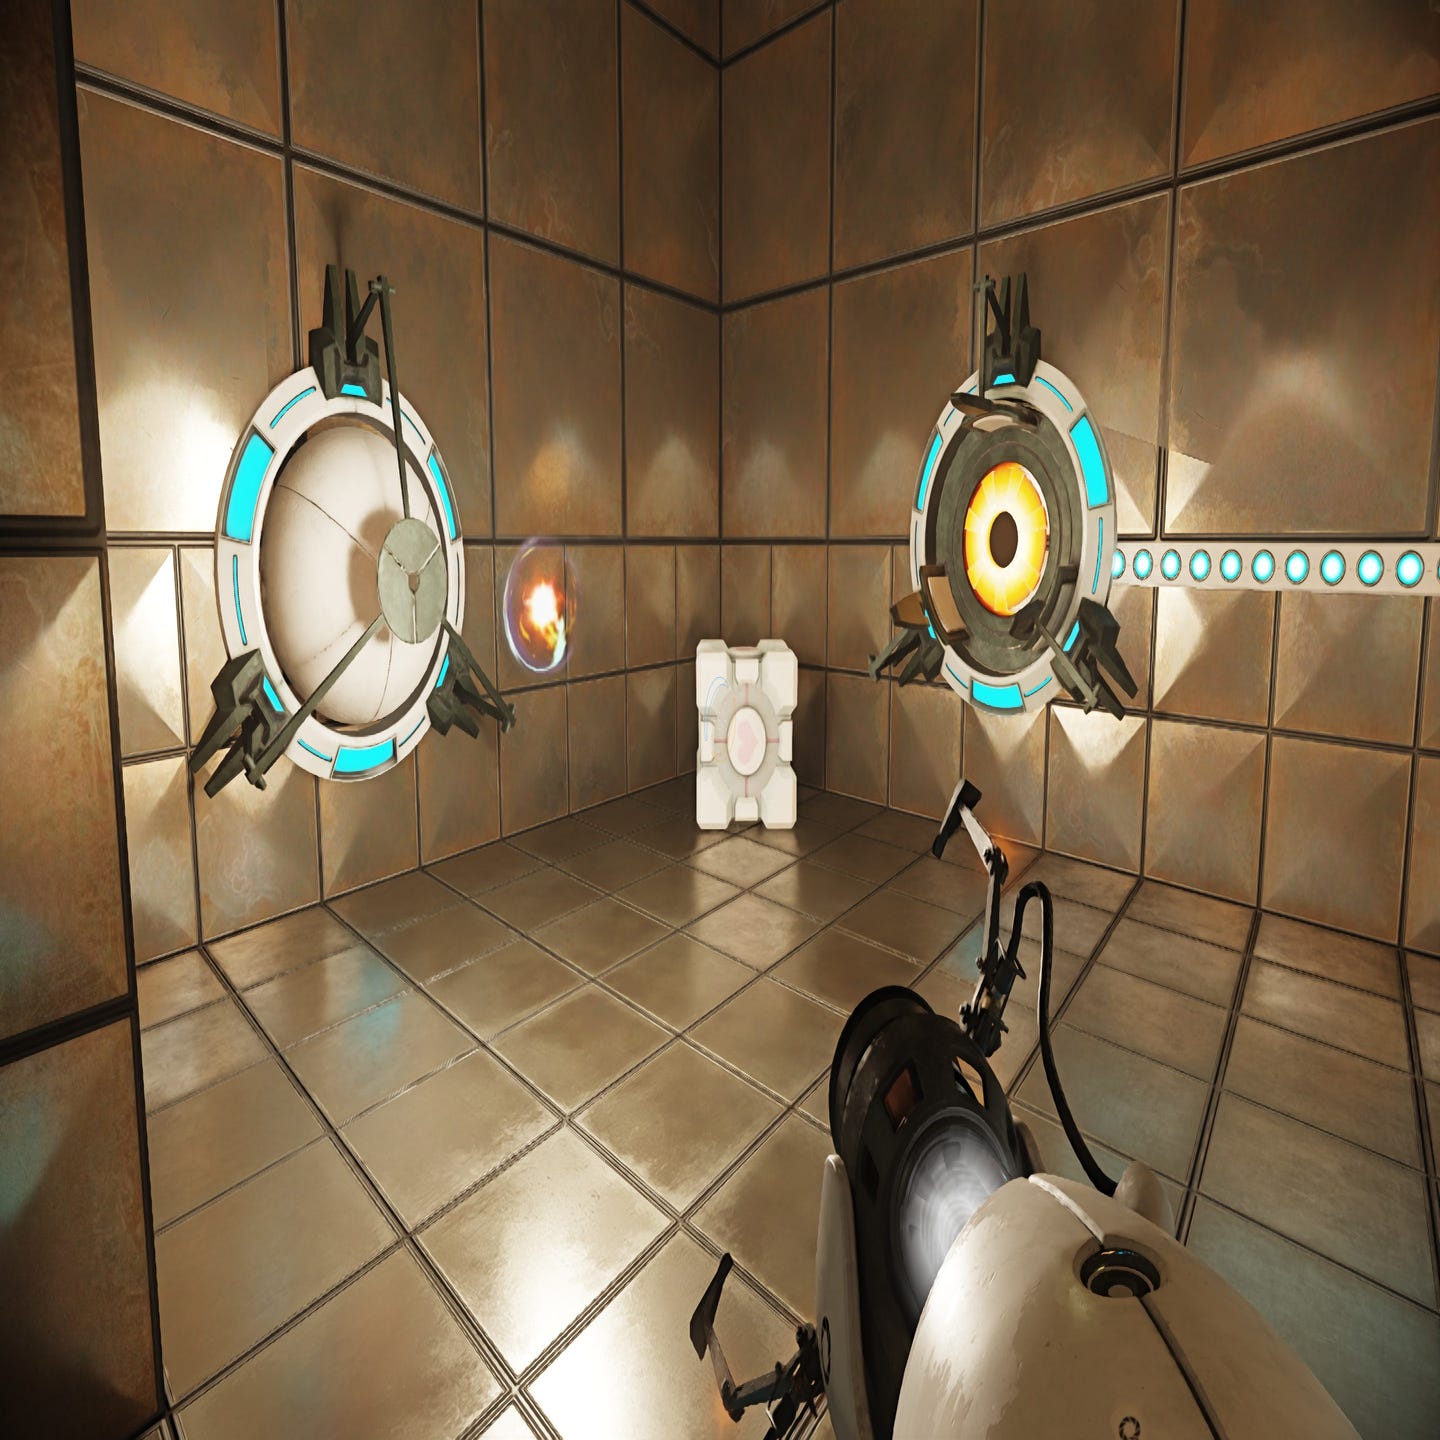 Nvidia updates Portal with ray tracing